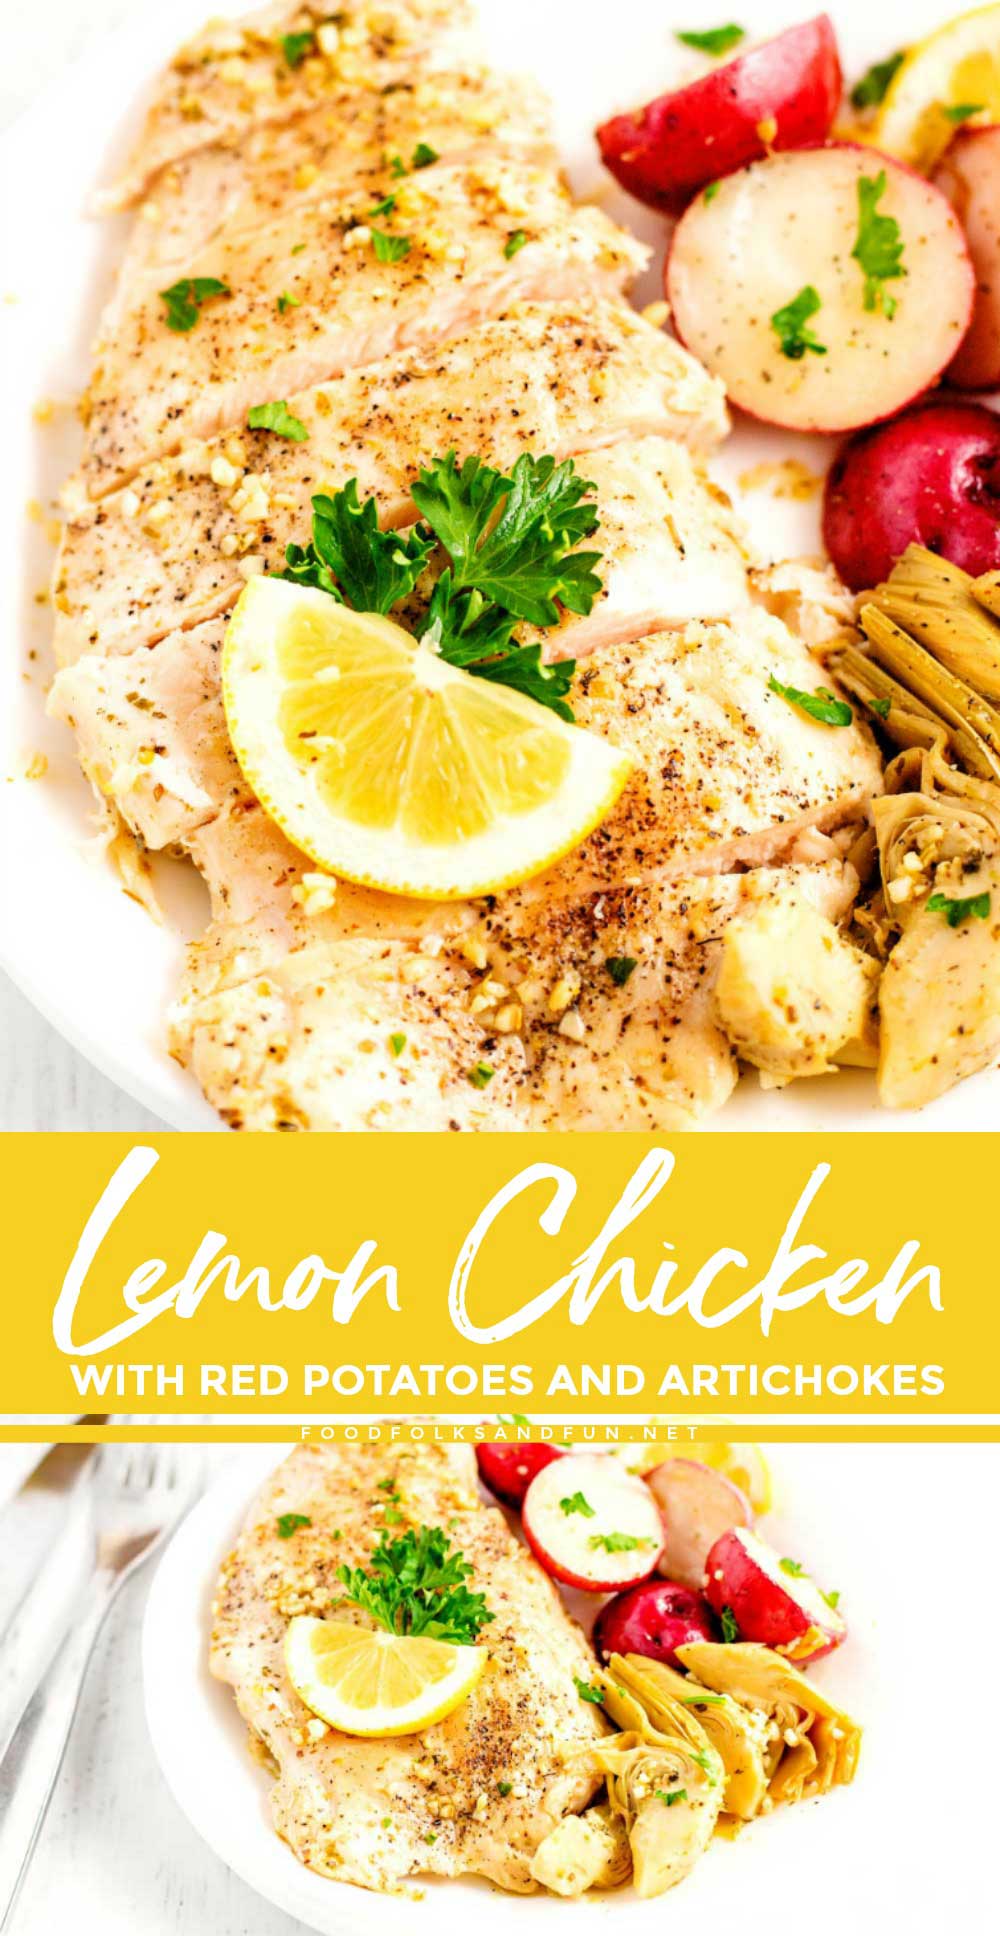 This Lemon Chicken with Potatoes and Artichokes recipe is a super simple weeknight dinner recipe that everyone loves and is fancy enough to serve when company comes over. #chicken #chickenrecipe #chickendinner #easyrecipe #easydinner #dinner #dinnerrecipe #recipeoftheday #recipeoftheweek #foodfolksandfun via @foodfolksandfun